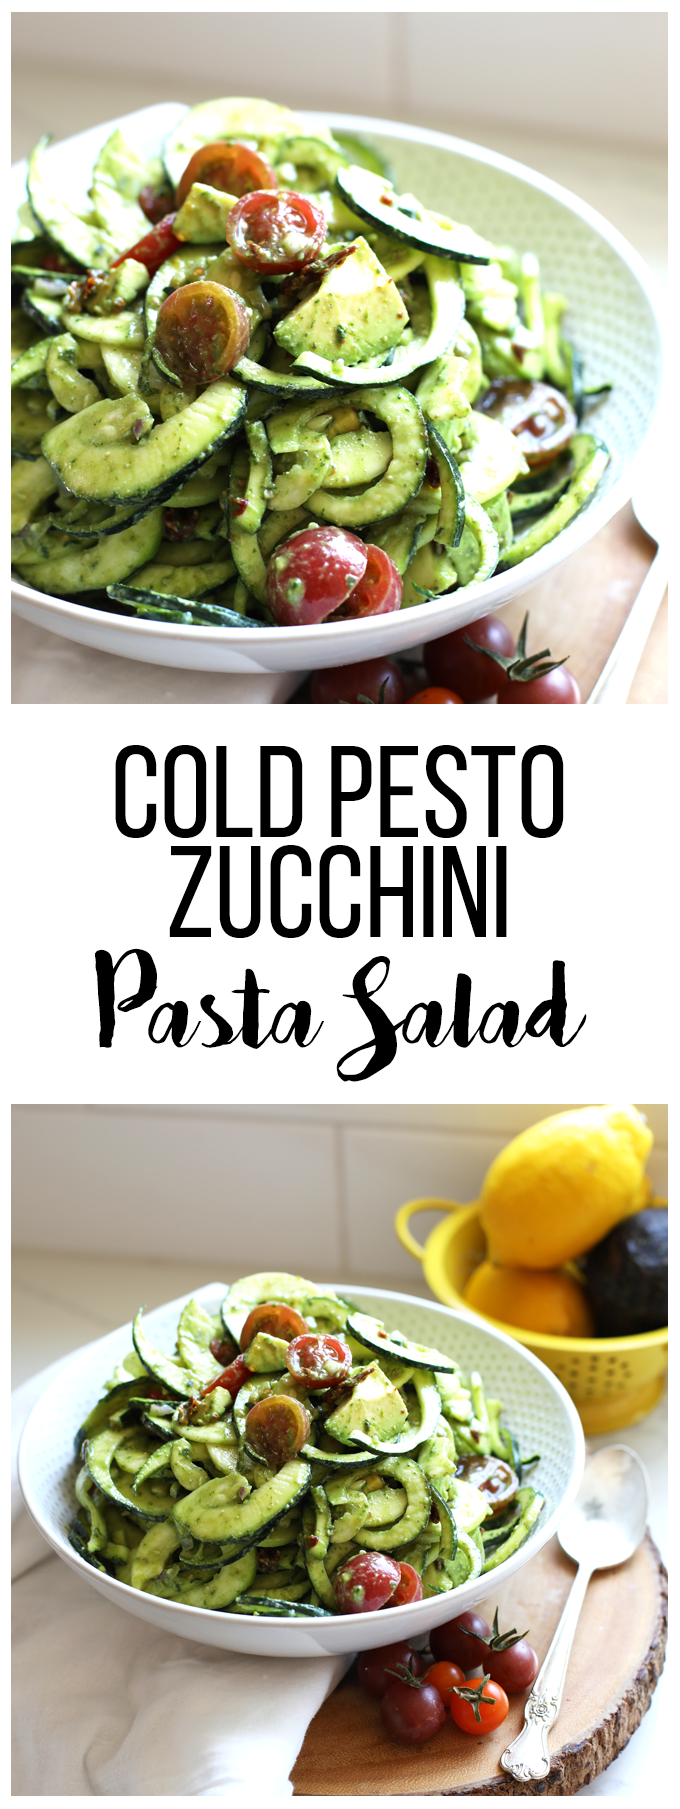 This Cold Zucchini Pasta Salad is a quick and easy way to make a veggie side dish that everyone will love!